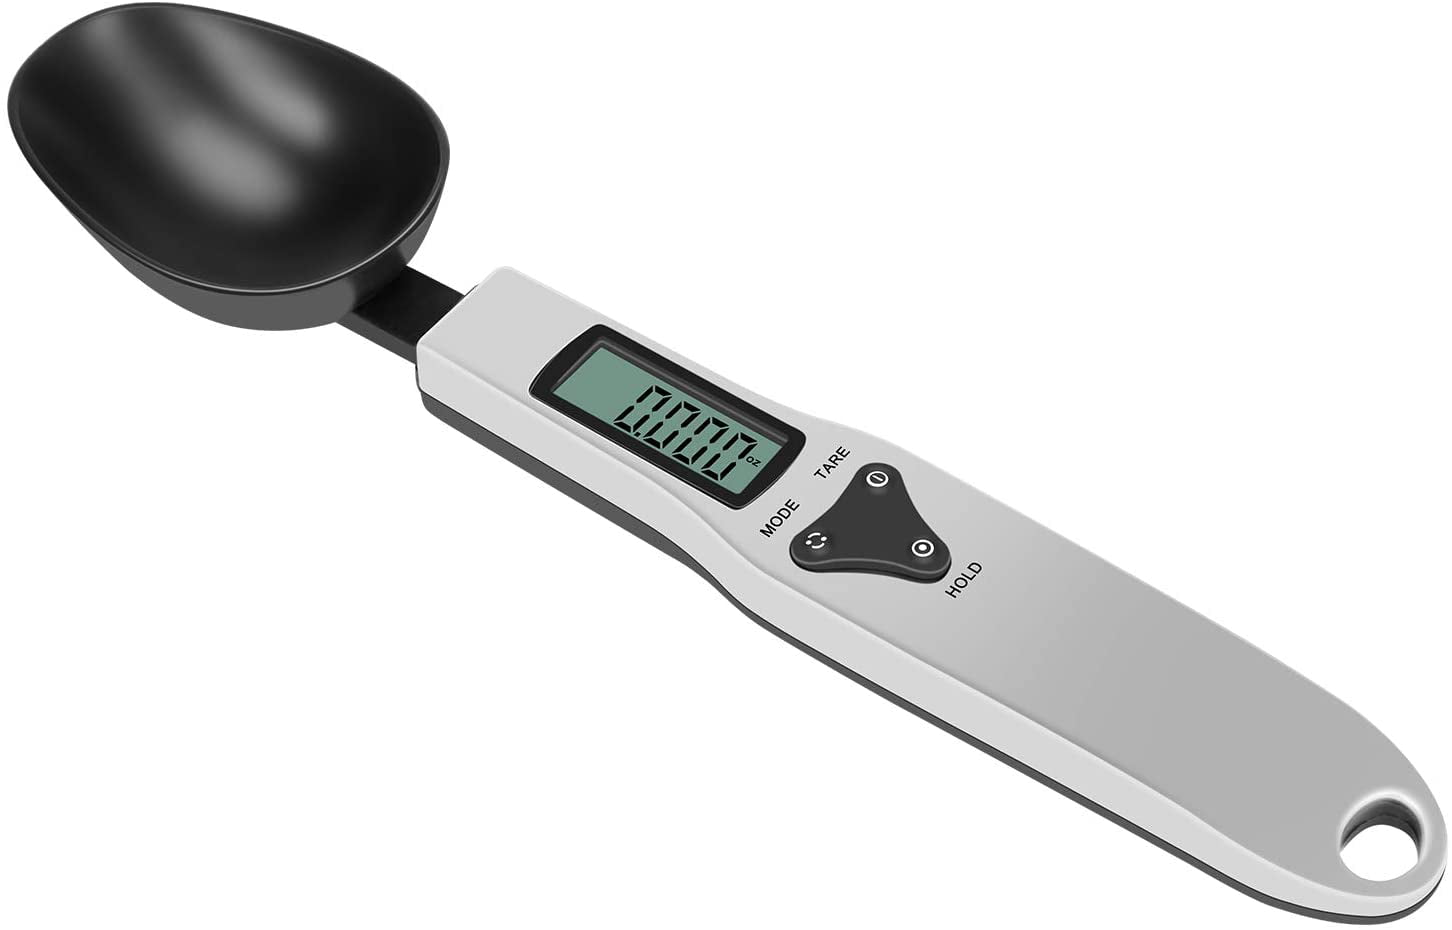 500g/0.1g Electronic LCD Digital Spoon Weight Scale Gram Kitchen Measuring Tool